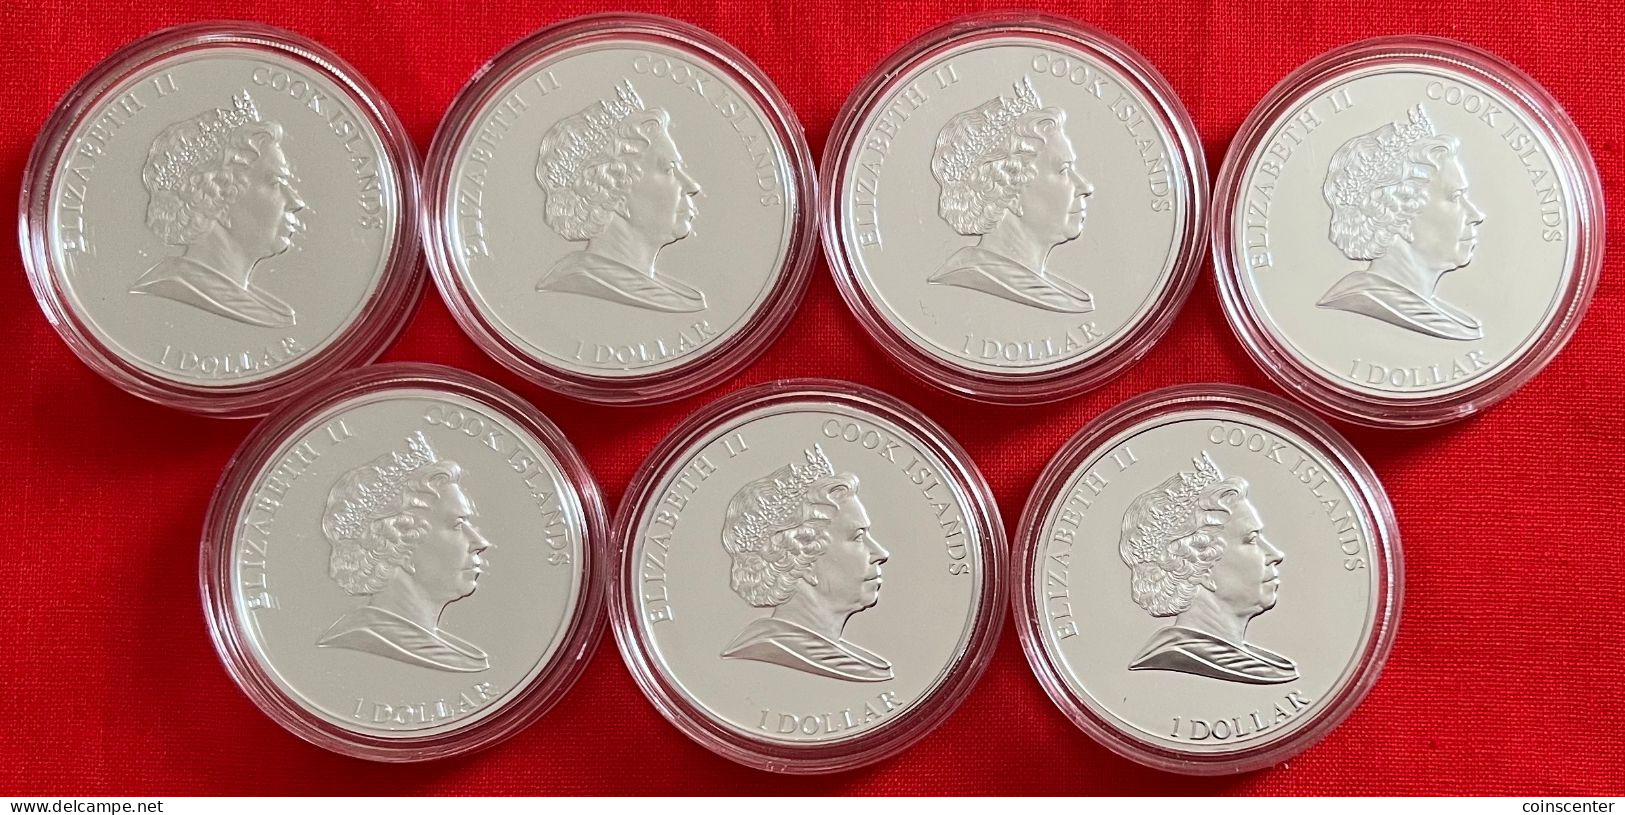 Cook Islands Set Of 7 Coins: 1 Dollar 2009 "7 Wonders Of Portugal" PROOF-LIKE - Cook